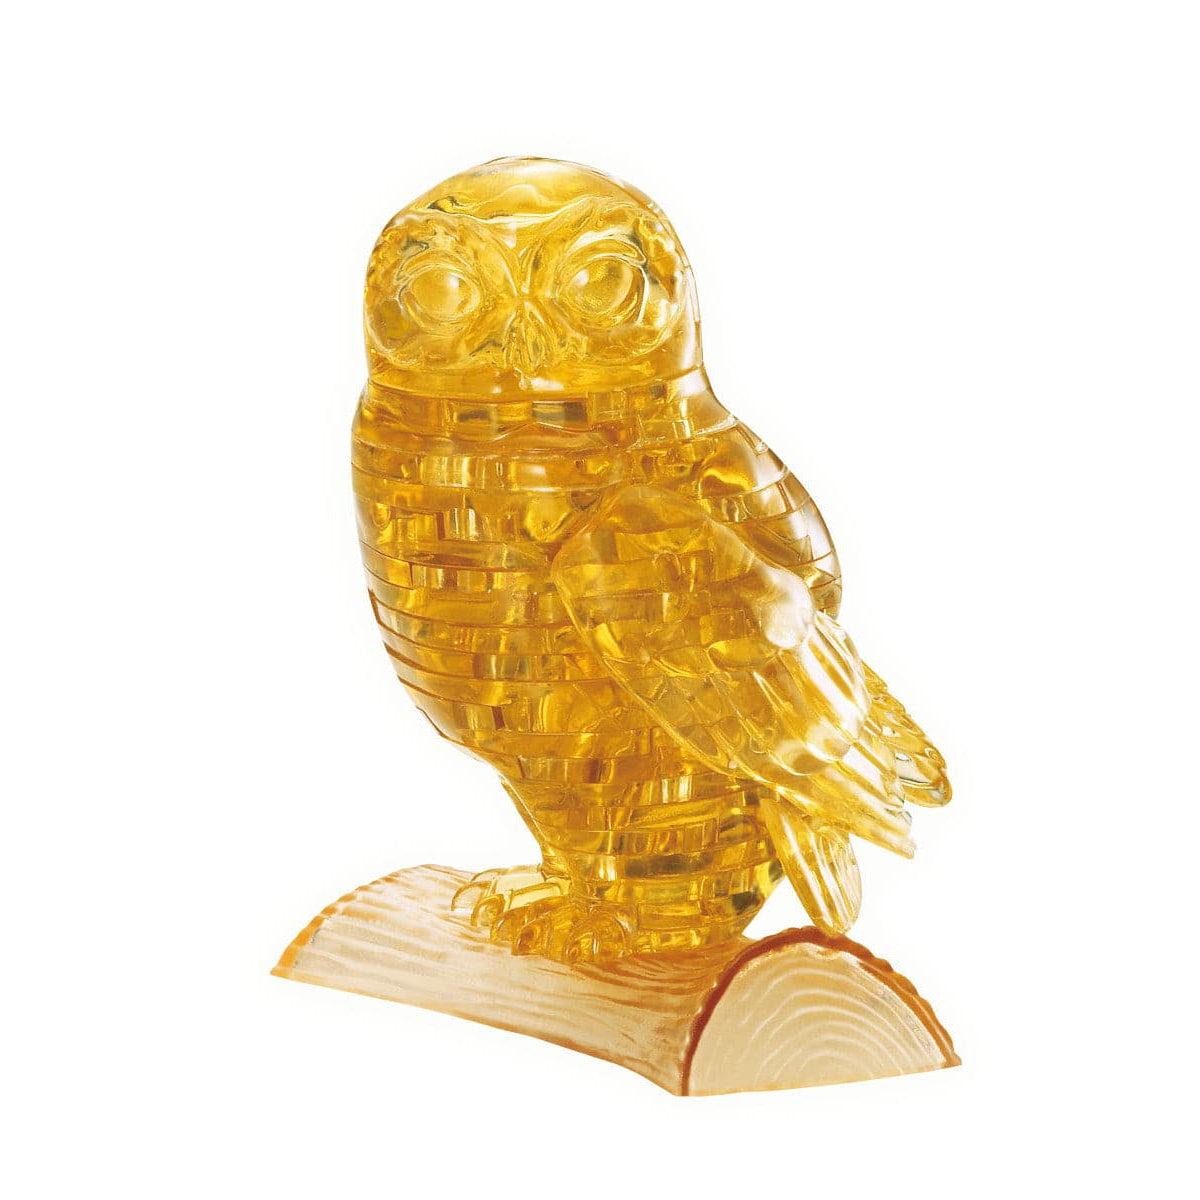 University Games-3D Crystal Puzzle - Brown Owl-30976-Legacy Toys